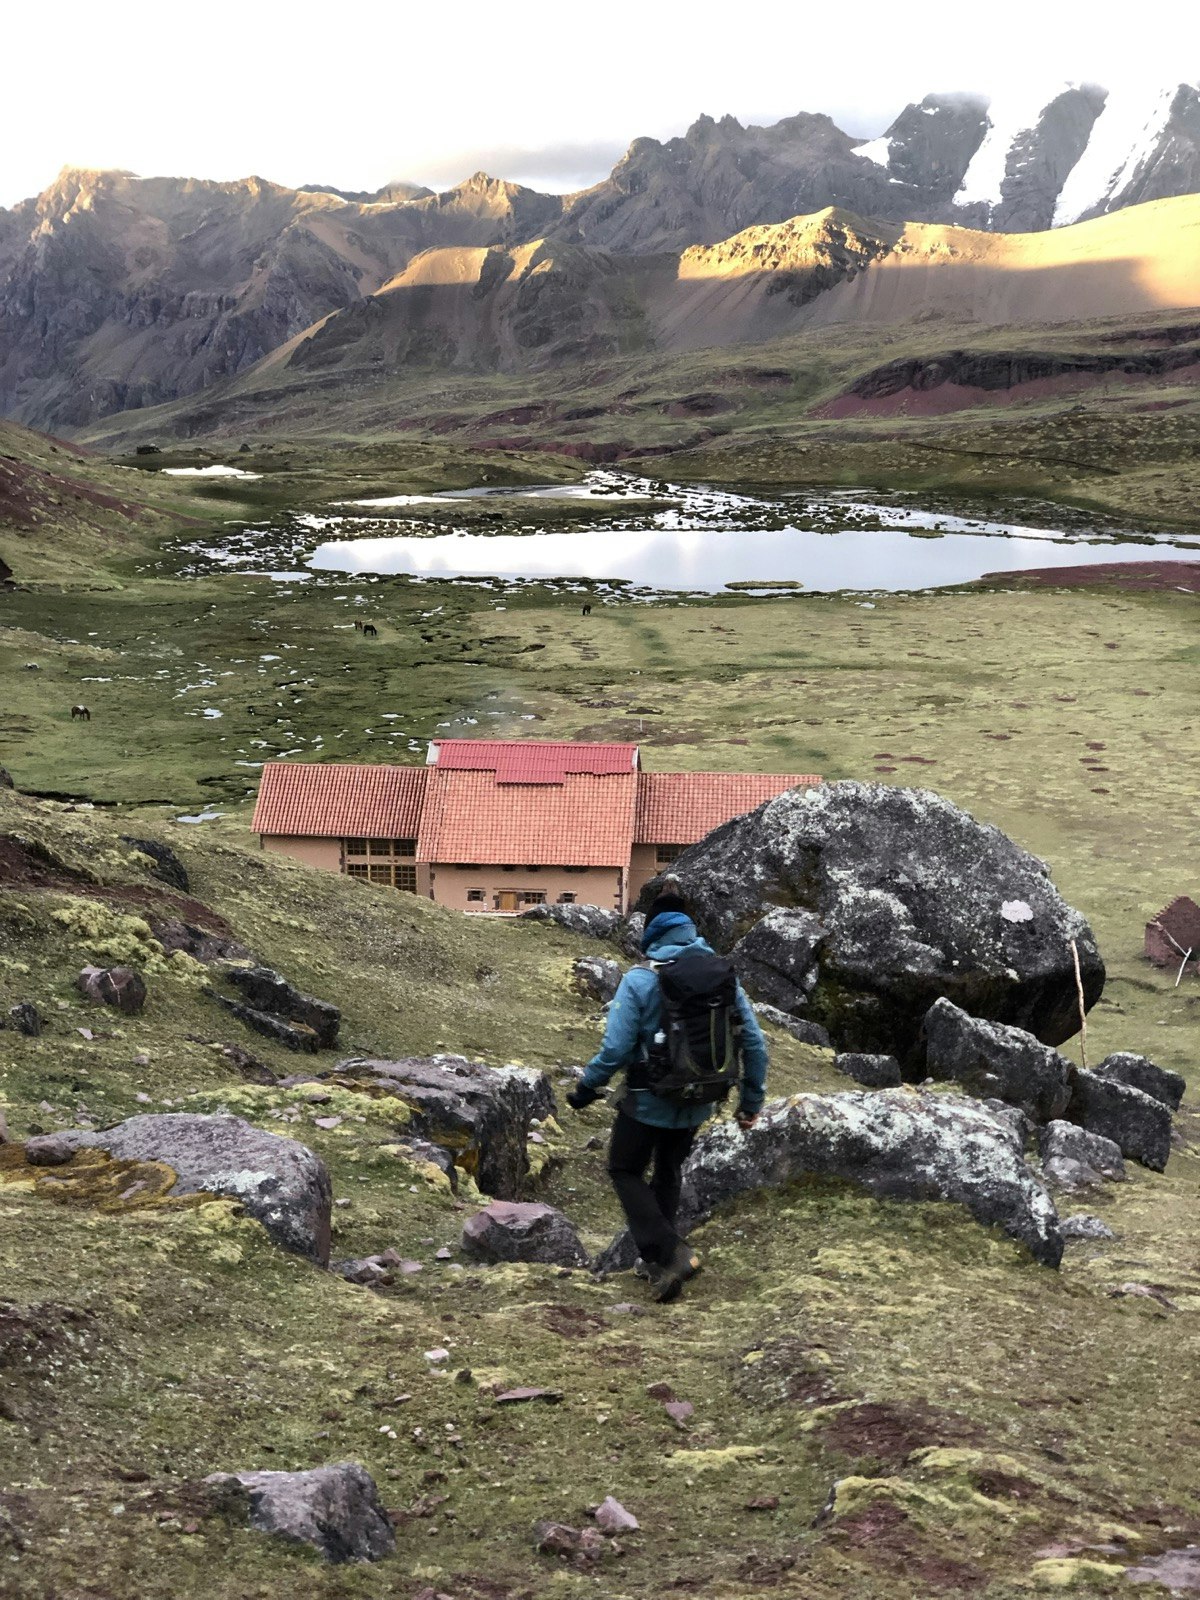 A man hikes down to a cabin nestled high in the mountains surrounded with grazing llamas